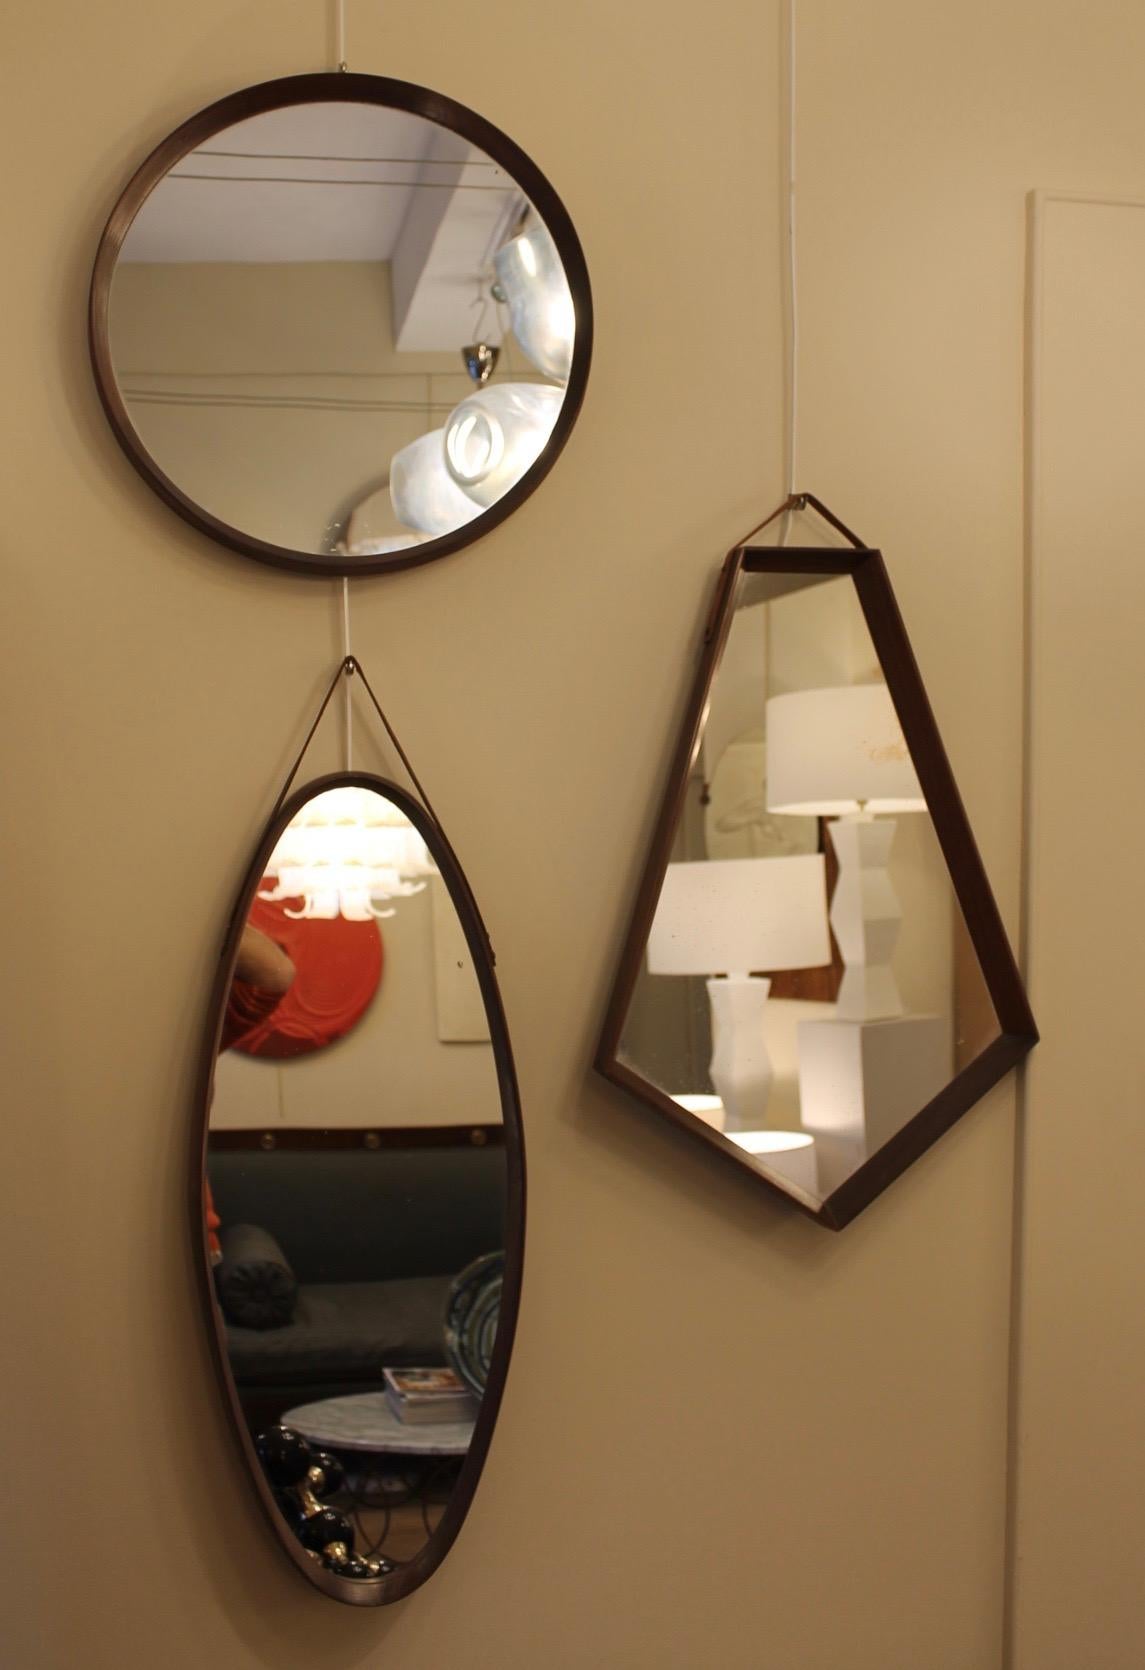 Three mirrors of different shapes, wooden structure,
Italian work from the 70s. There are some scratches on the wooden structure. The use of time. But nothing broken.
The mirrors are vintage, they are a little stained. Wear of time.
The leather